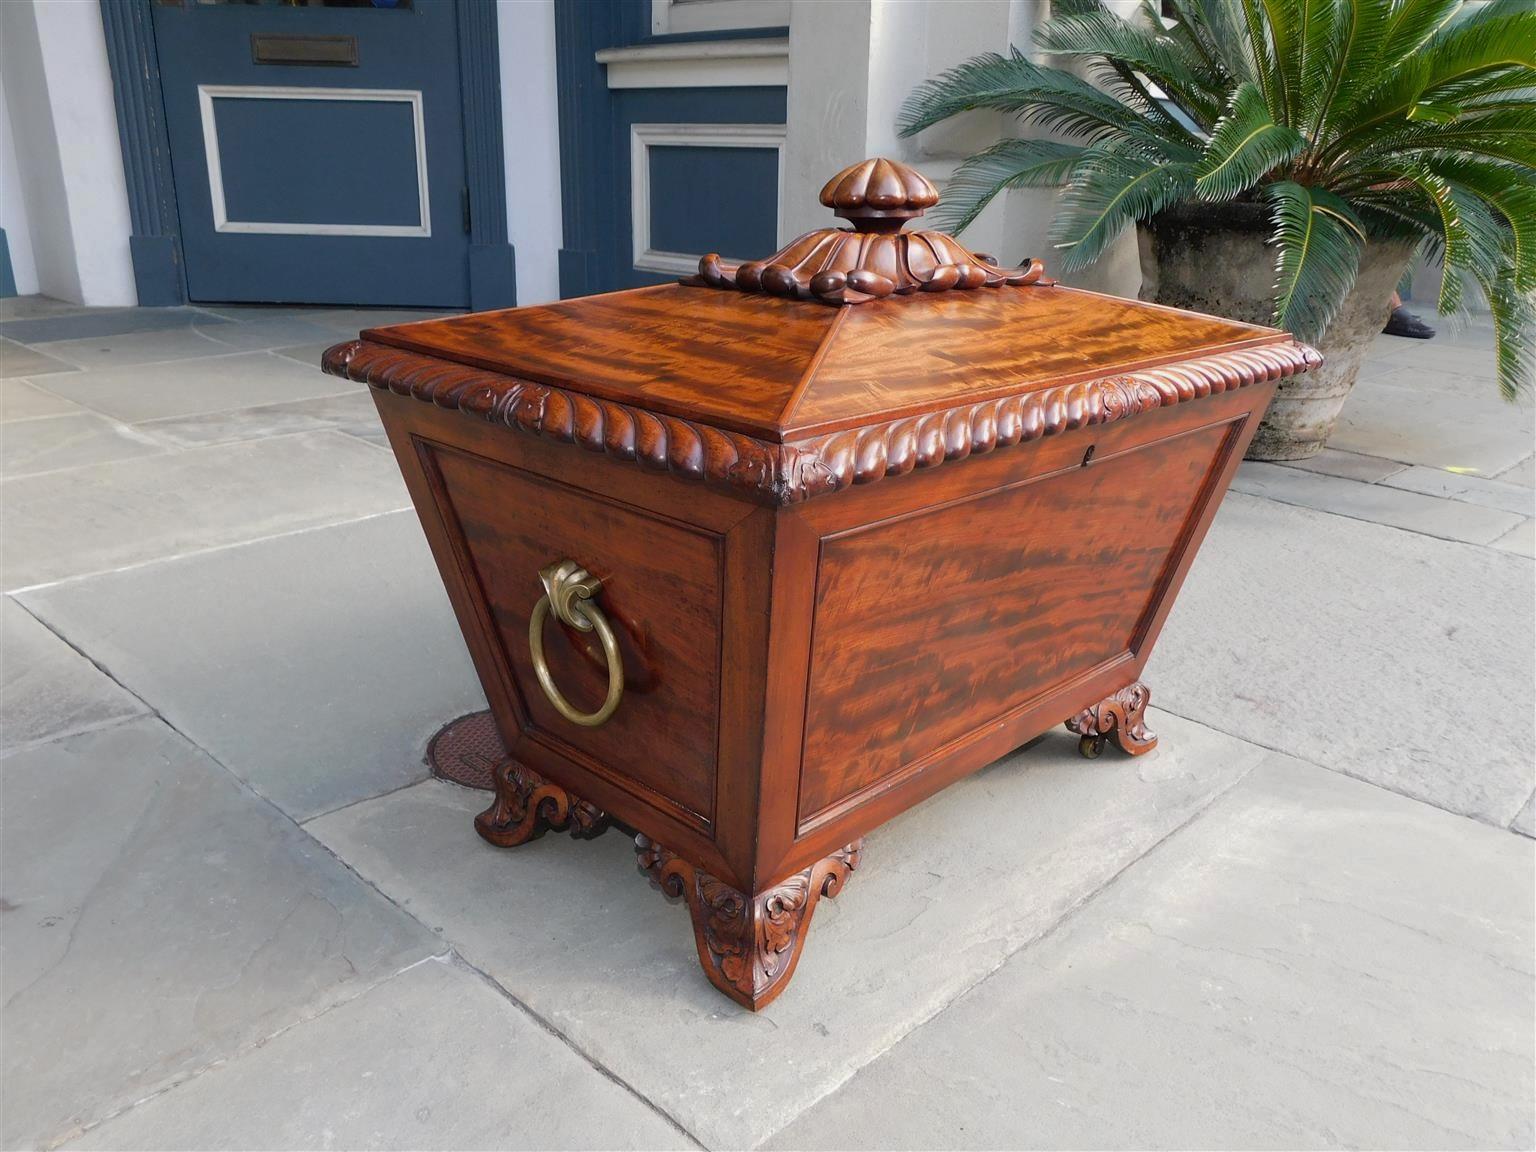 Scottish Regency Mahogany Hinged Cellarette with Original Lead Liner, Circa 1810 In Excellent Condition For Sale In Hollywood, SC